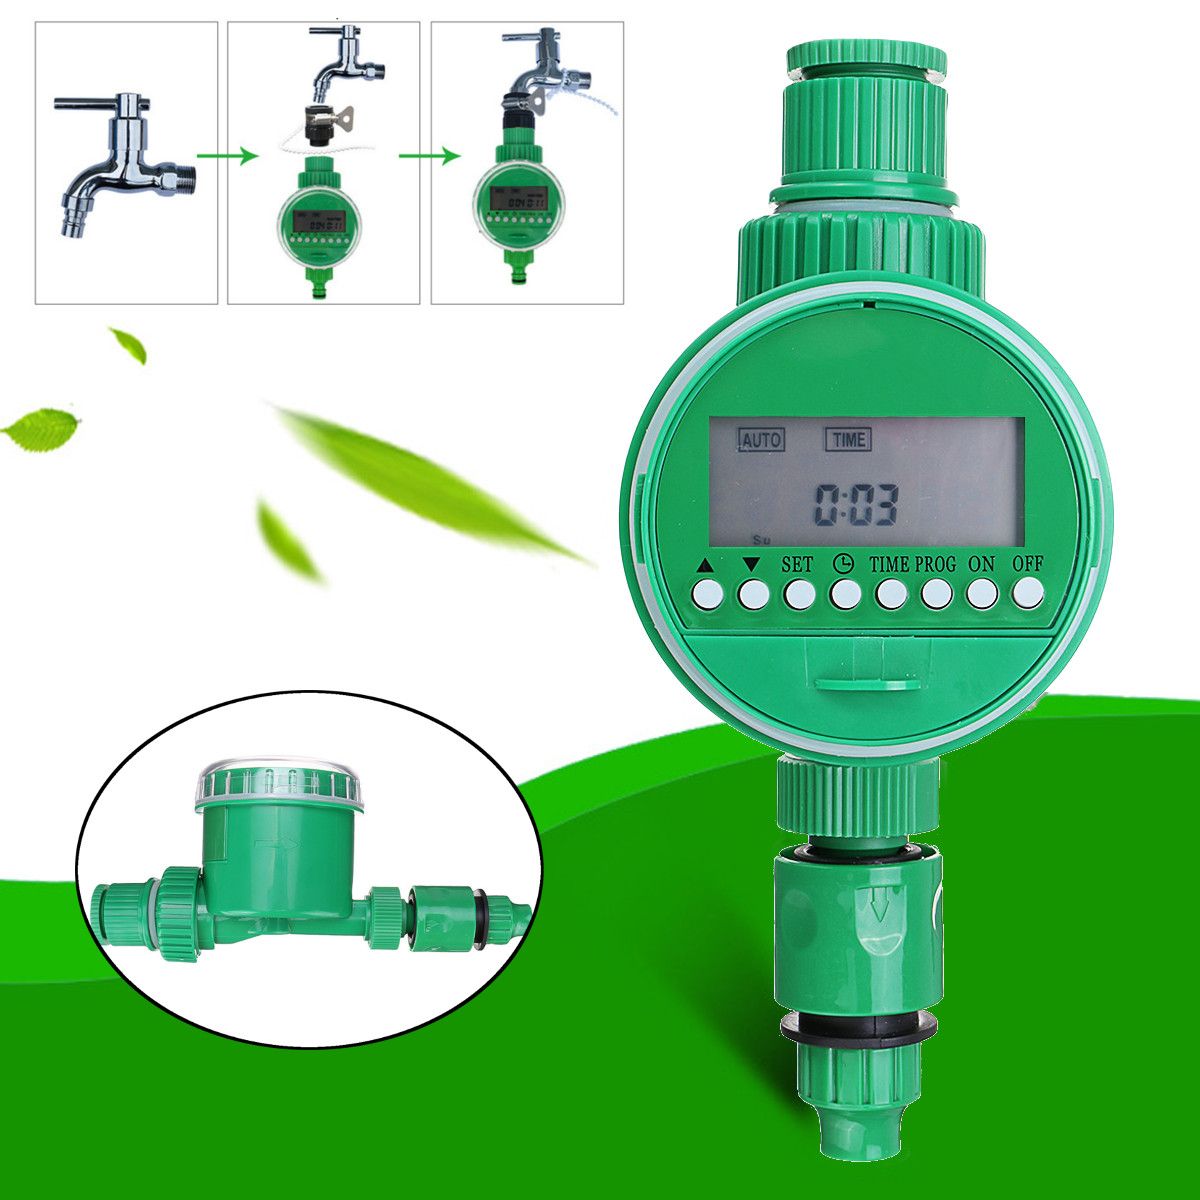 72PcsSet-30M-Hose-Water-Controller-Timer-LCD-Display-Adjustable-Drippers-DIY-Micro-Drip-Misting-Irri-1546379